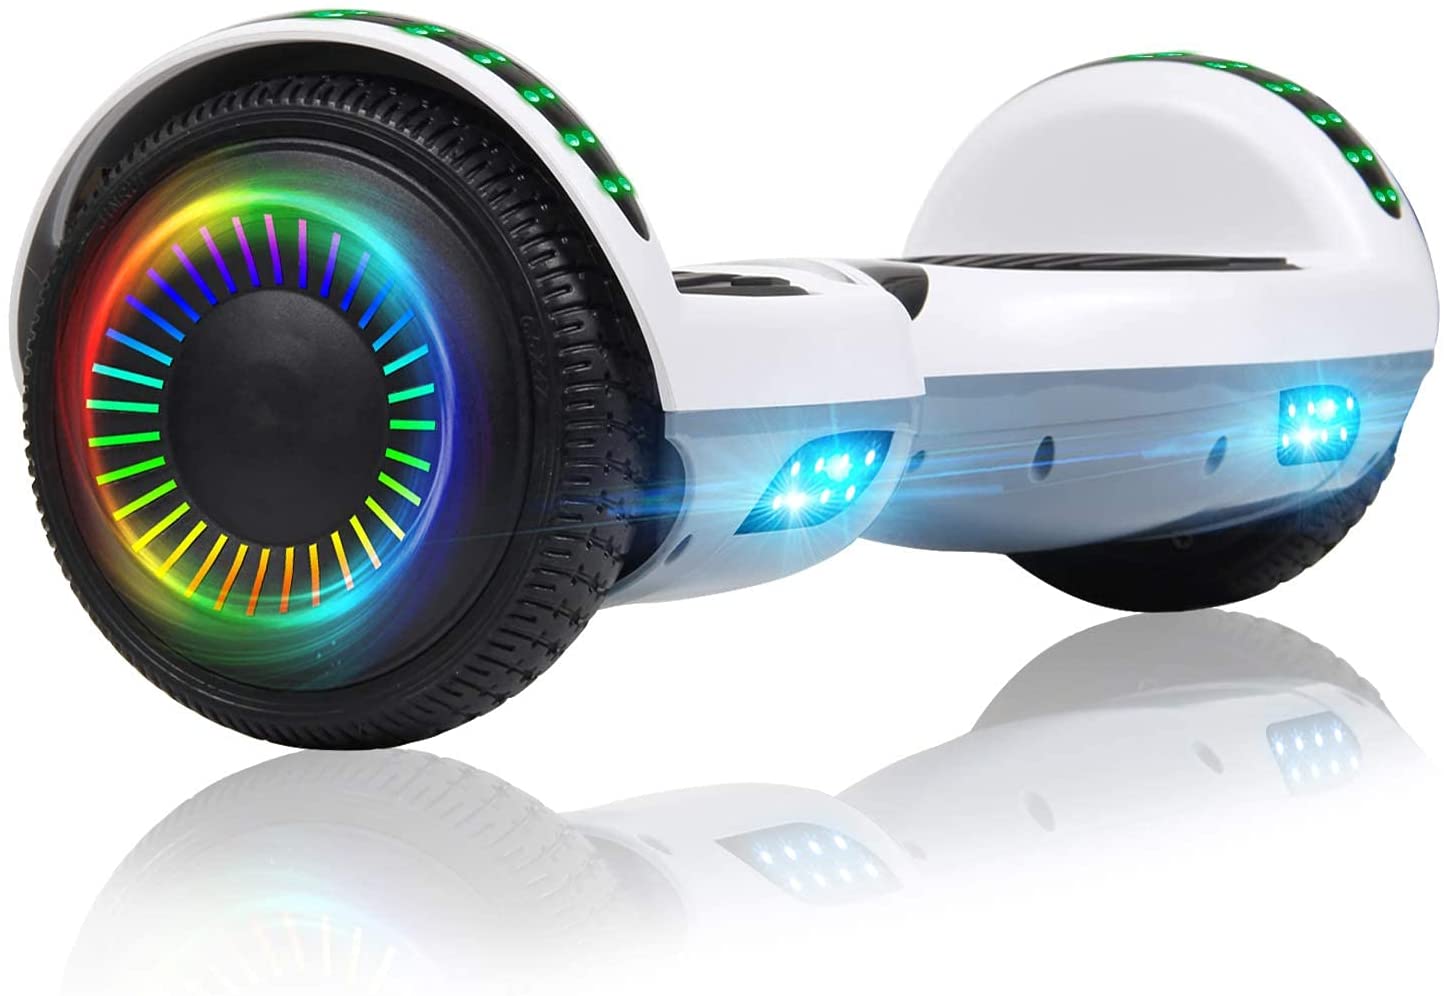 Felimoda Hoverboard with Bluetooth Speaker and LED Lights, 6.5" Self-Balancing Scooters Hoverboard for Kids